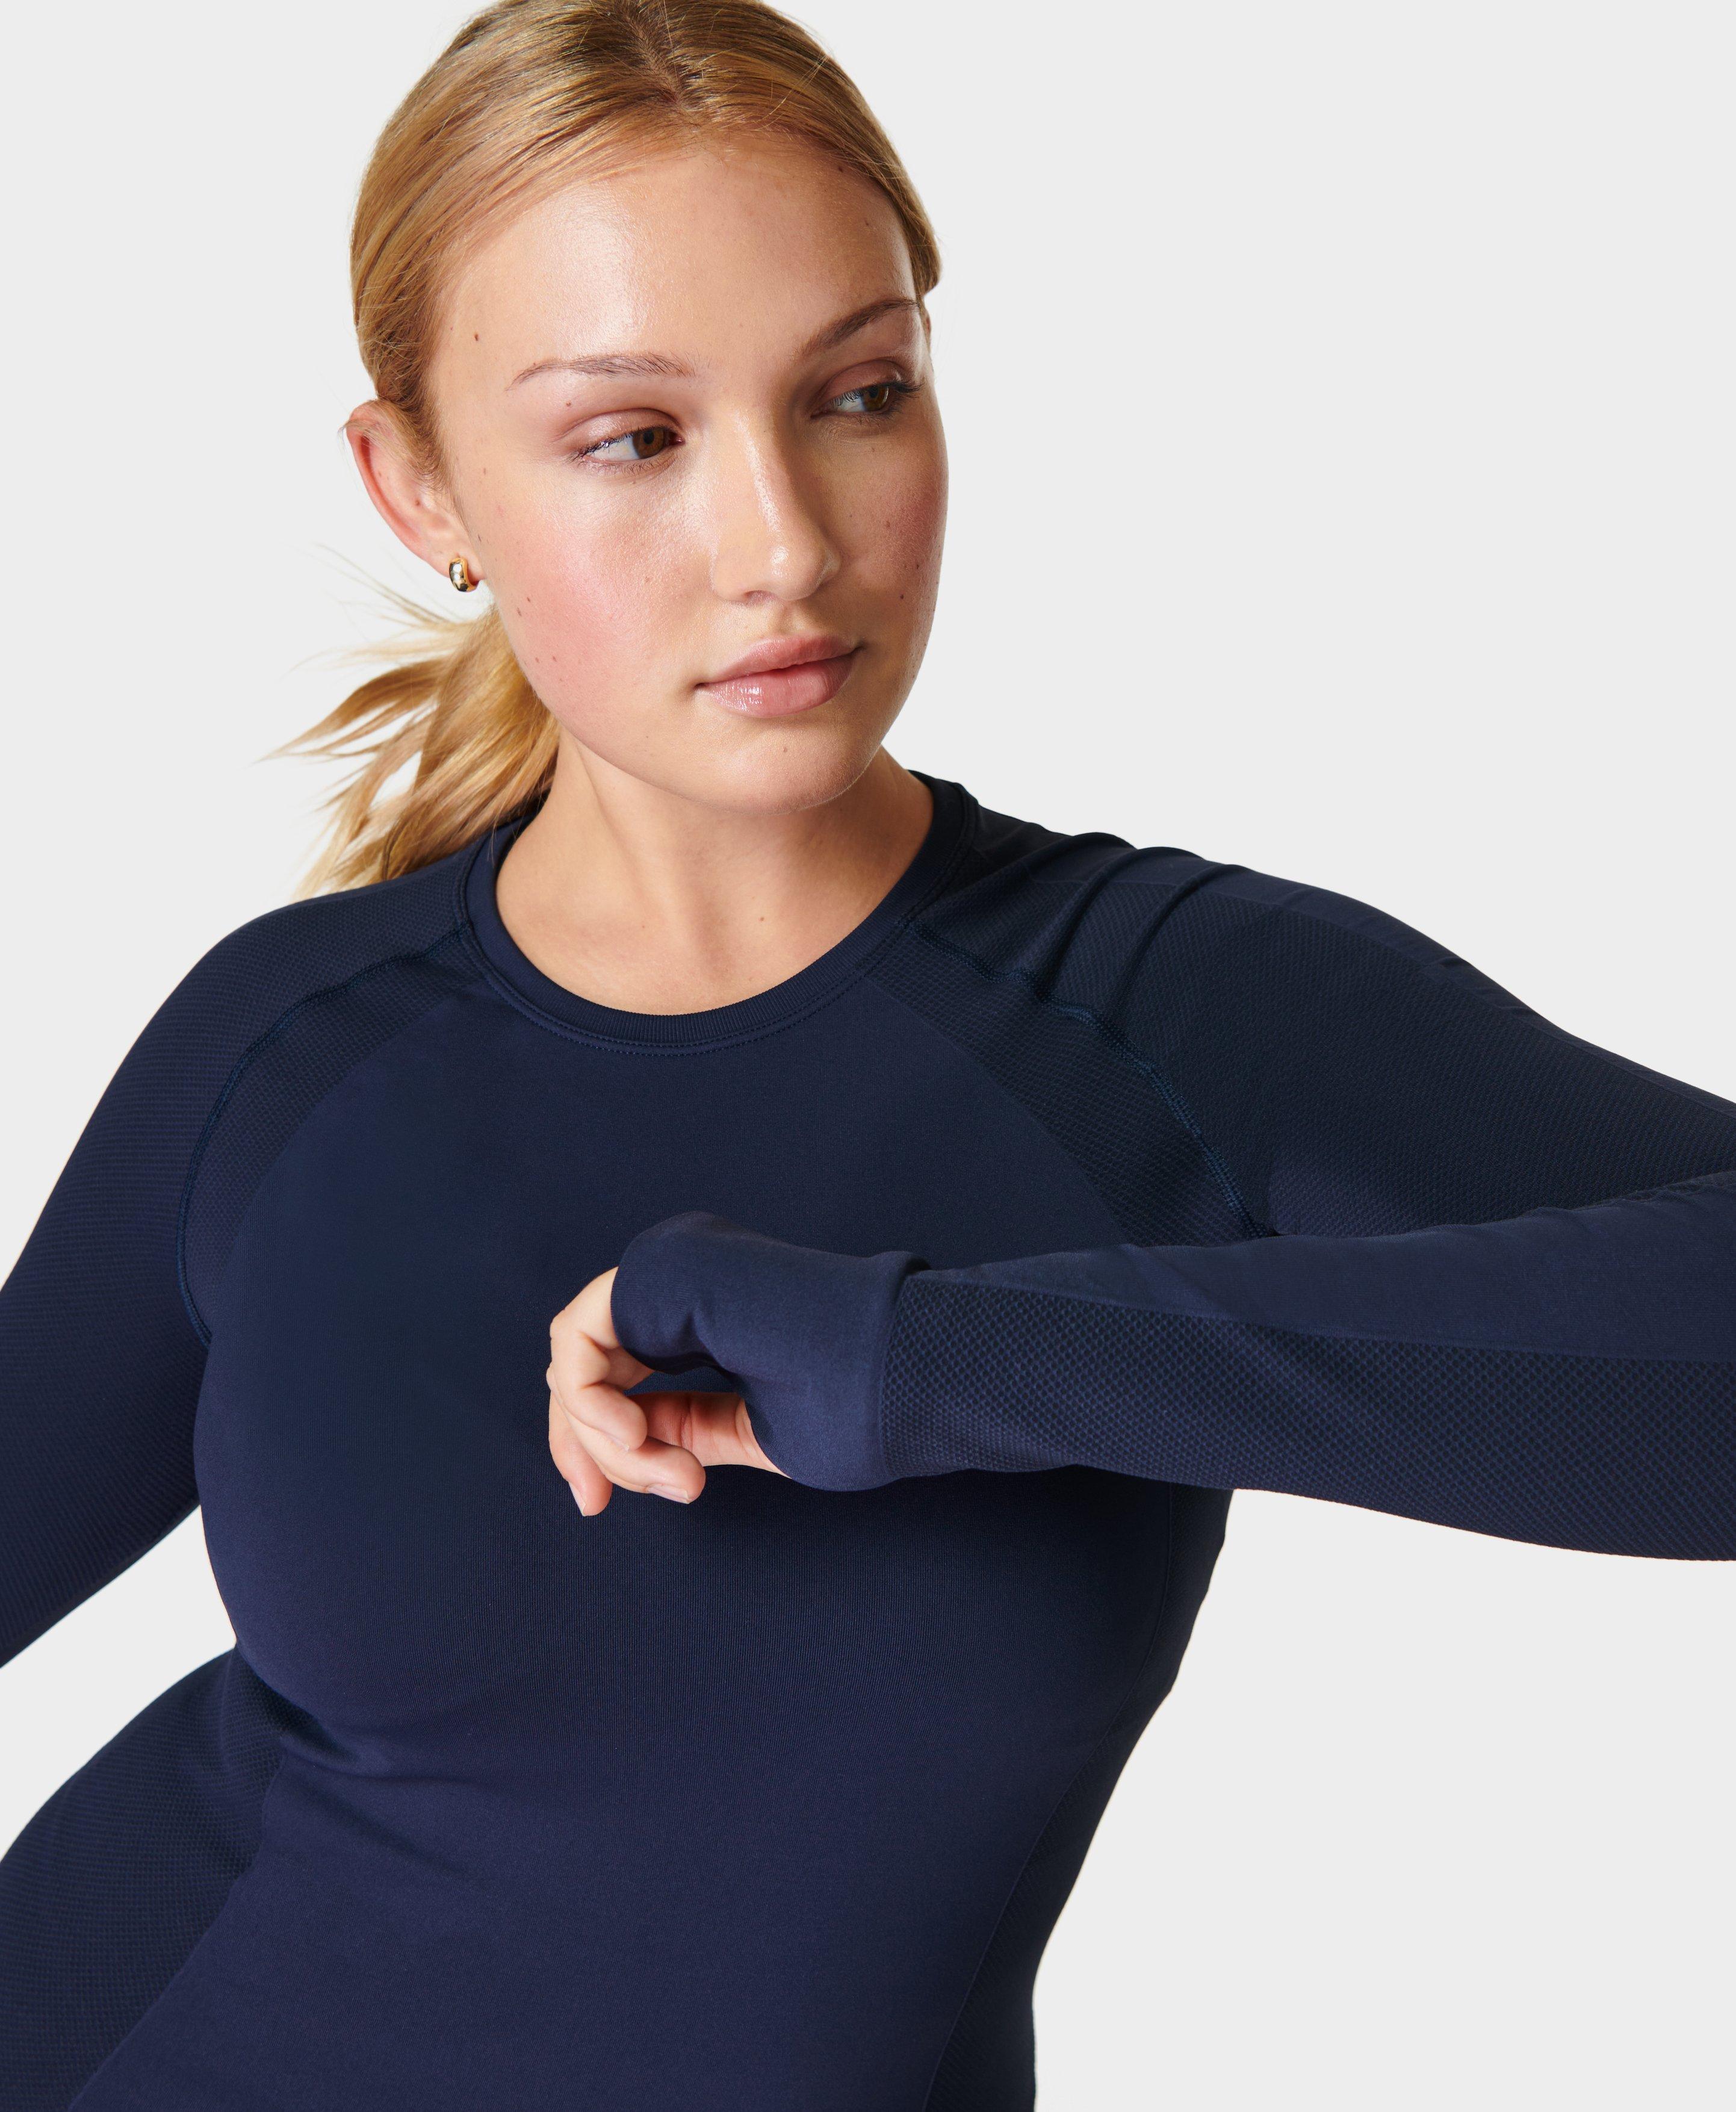 Athlete Seamless Workout Long Sleeve Top - Navy Blue, Women's Base Layers  & Long Sleeve Tops